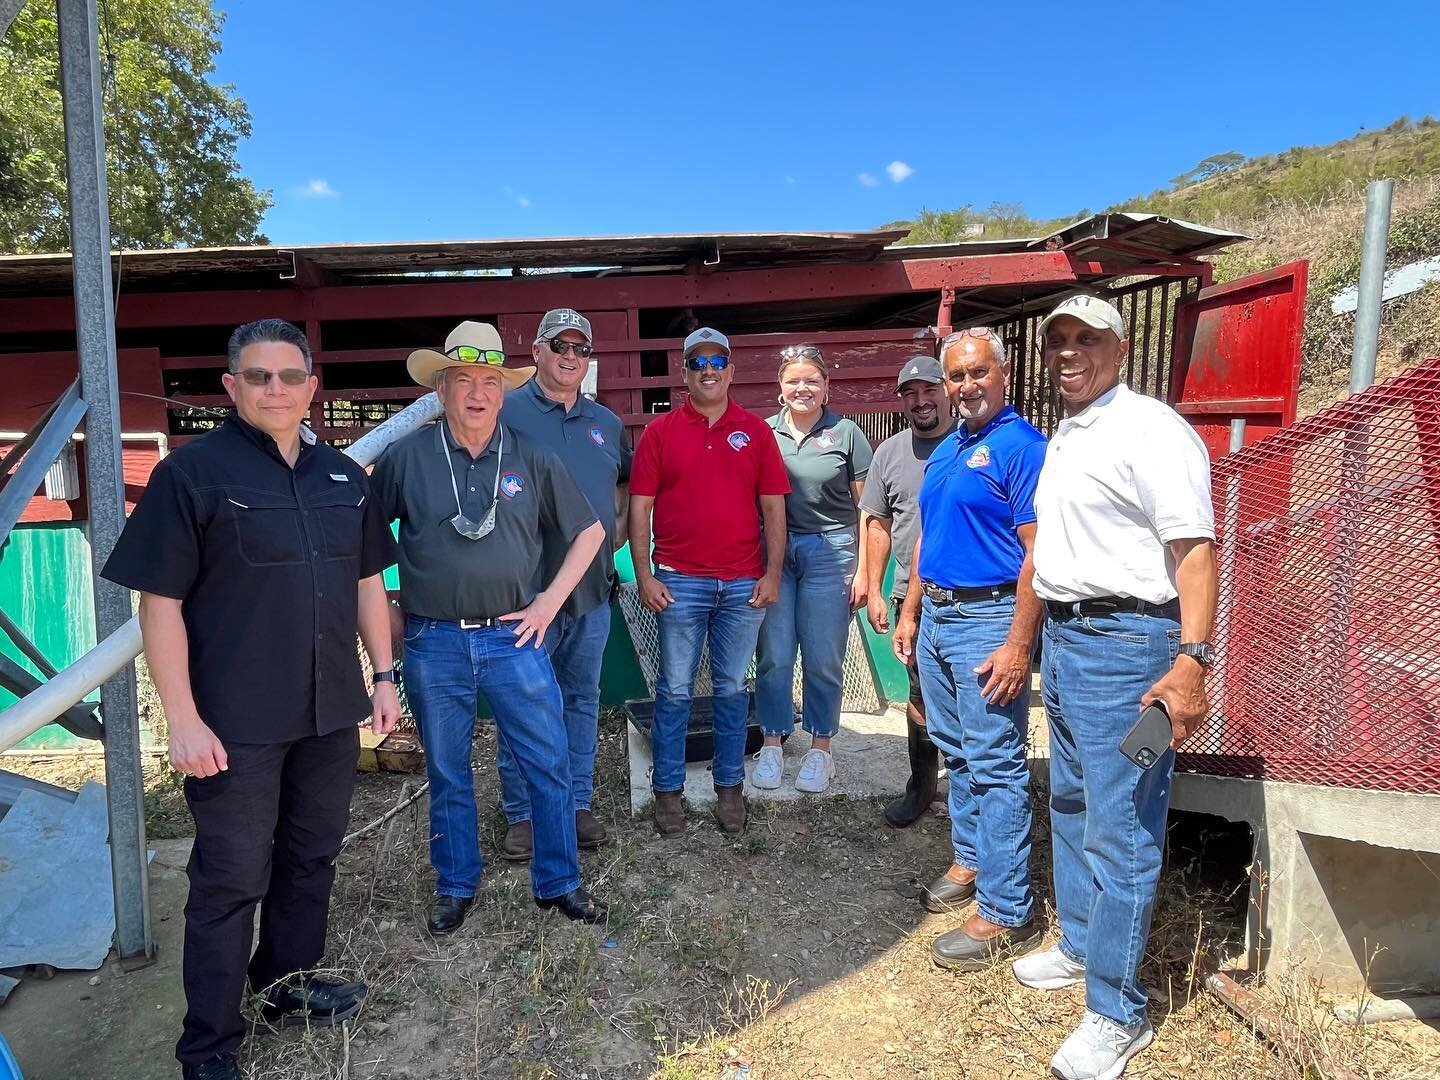 Flower Hill Institute (FHI) has provided technical assistance to more than 475 small meat processing enterprises working with meat and poultry processing facilities across the U.S., including the Northern Mariana Islands and Puerto Rico.

Since Sunda